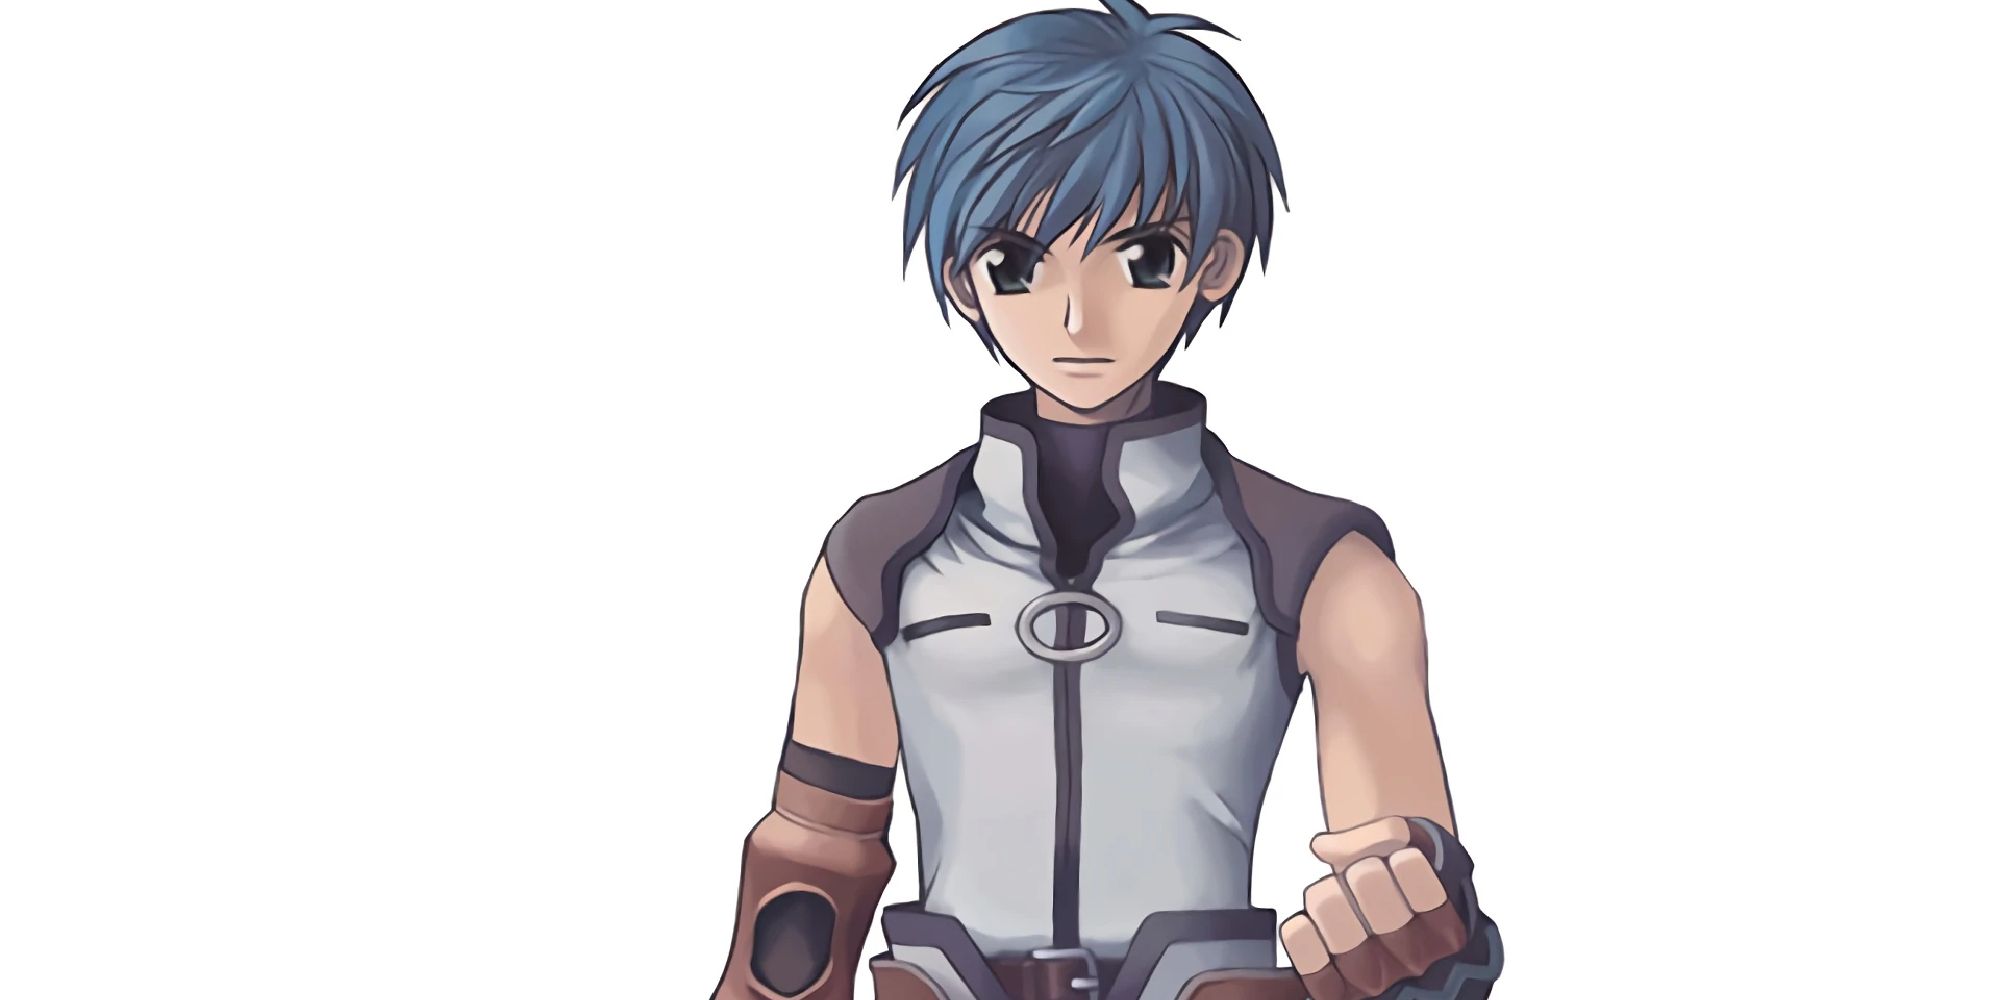 Character art for Fayt Leingod, the blue-haired protagonist of Star Ocean: Til The End Of Time